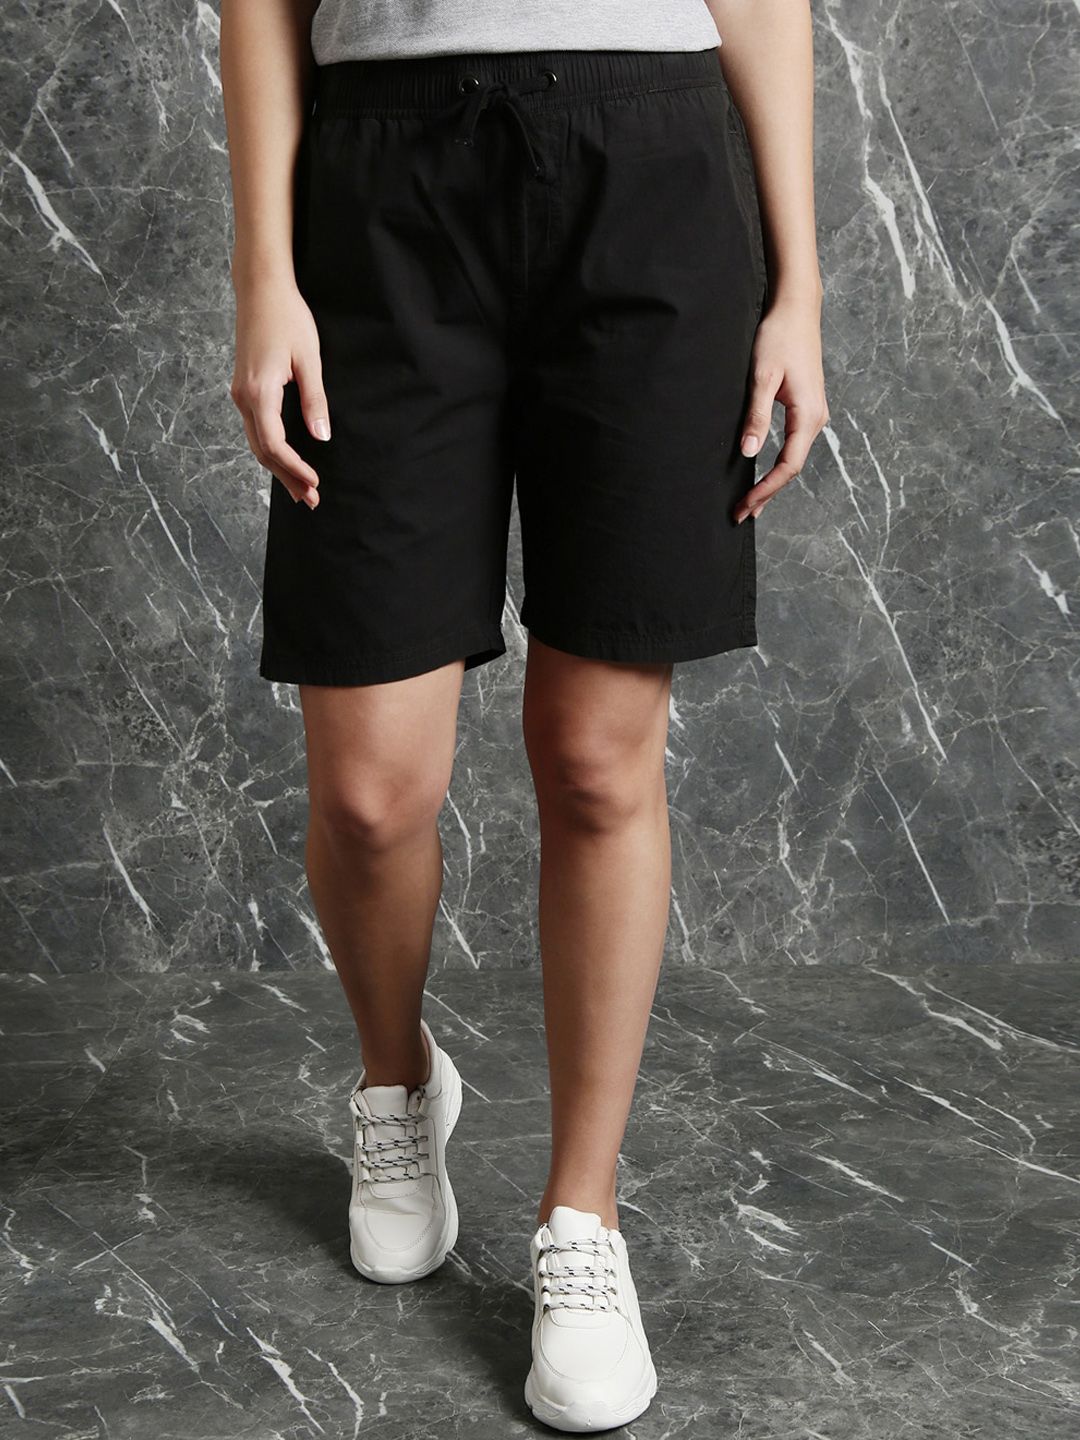 Breakbounce Black Women Slim Fit Low-Rise Cotton Shorts Price in India